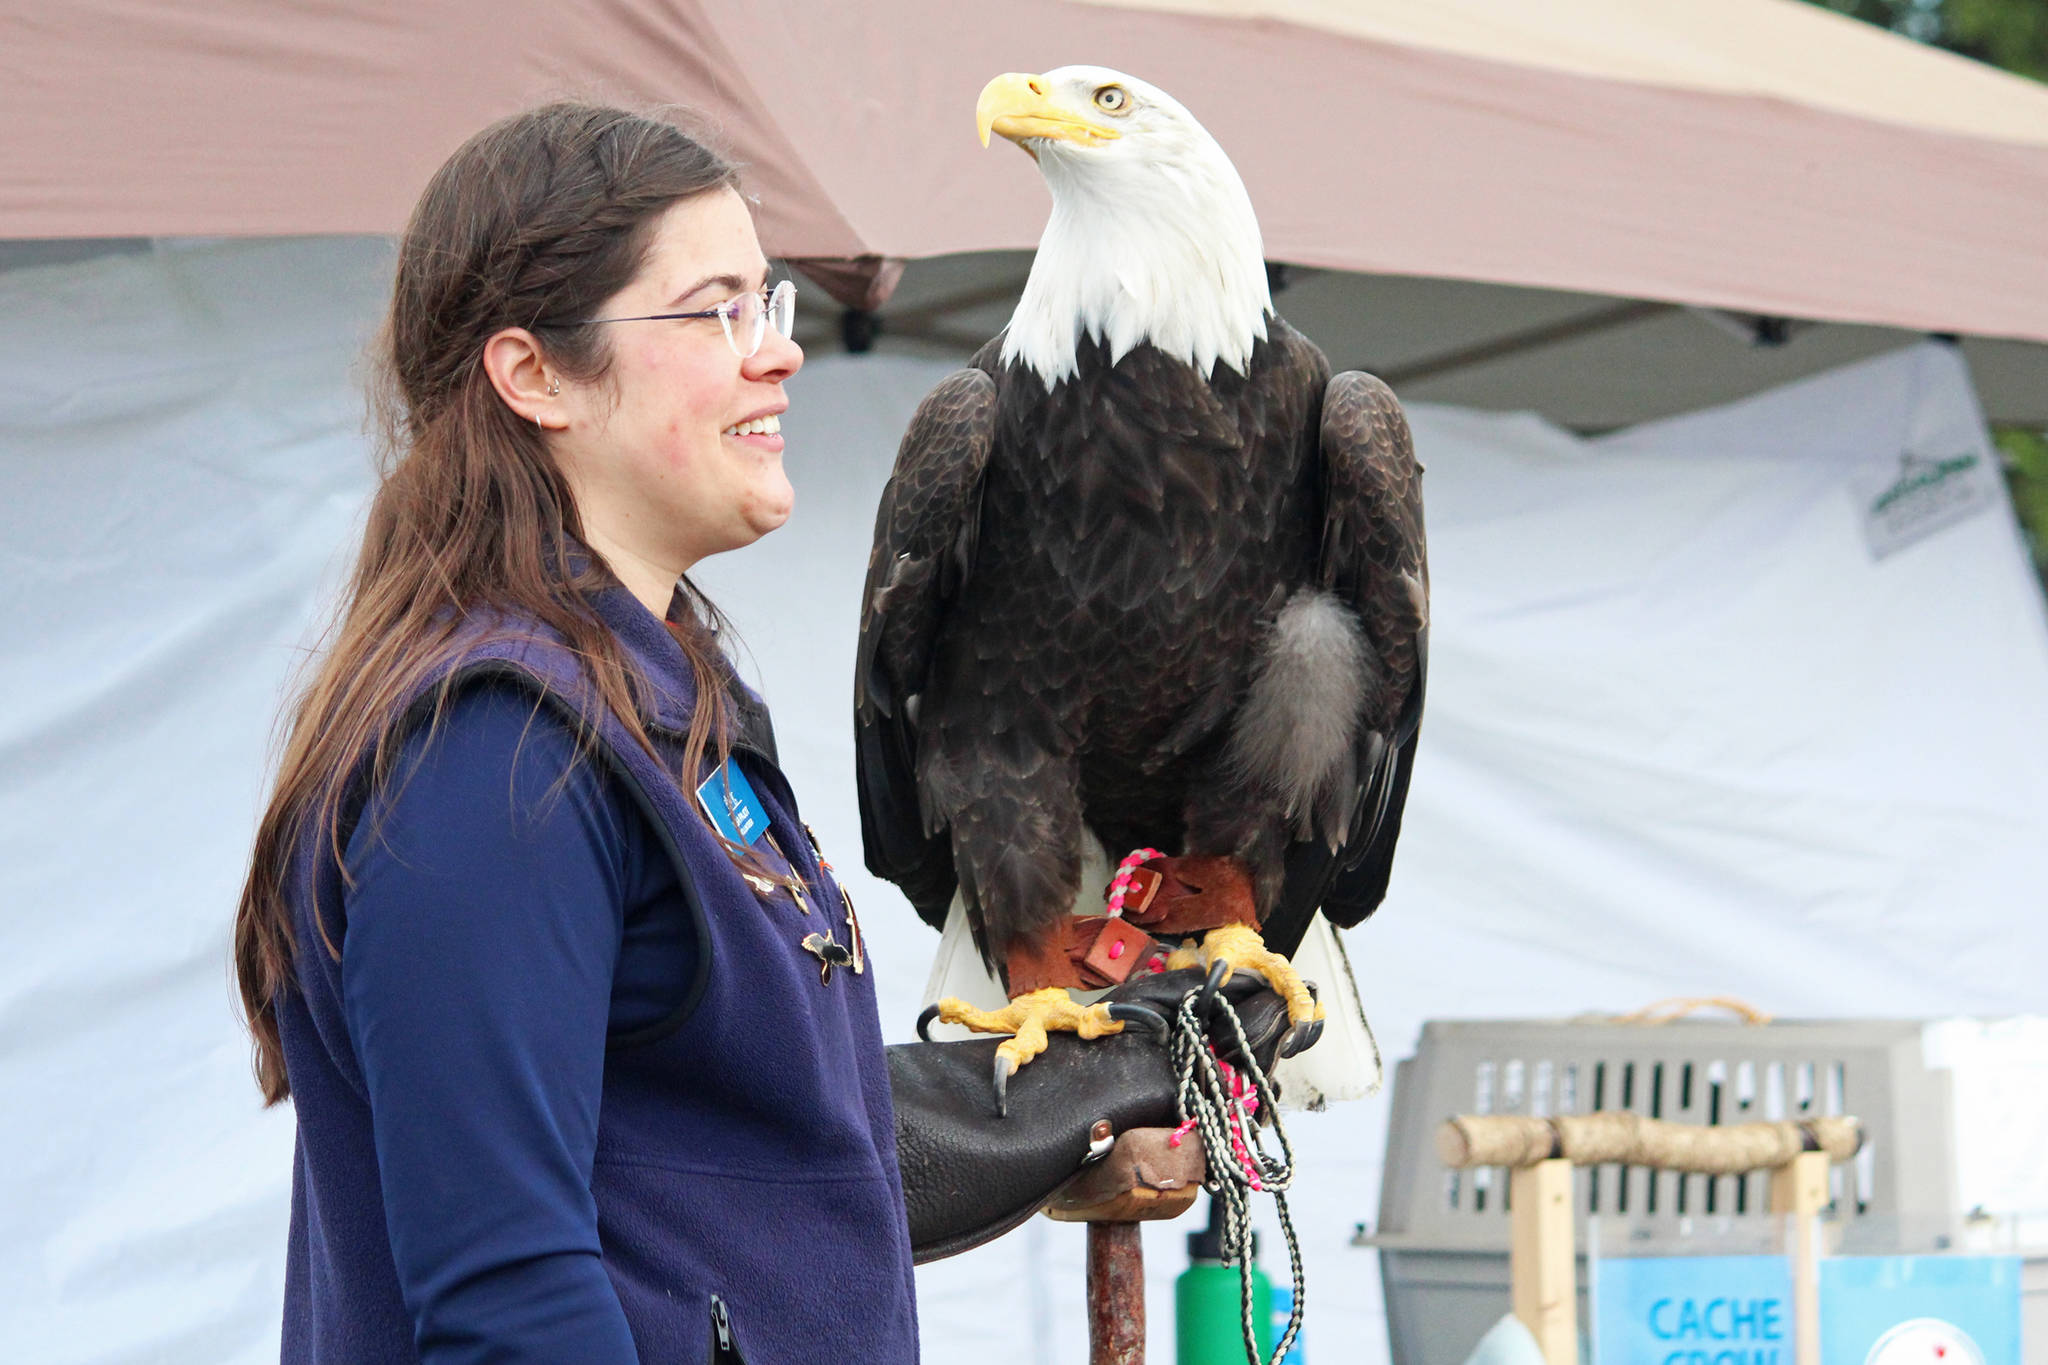 Lisa Pajot of the Bird Treatment and Learning Center speaks to gathered onlookers about Petra, a 23-year-old eagle, while Petra surveys the scene at this year’s Kenai River Festival on Saturday, June 10, 2017 at Soldotna Creek Park in Soldotna, Alaska. (Megan Pacer/Peninsula Clarion)